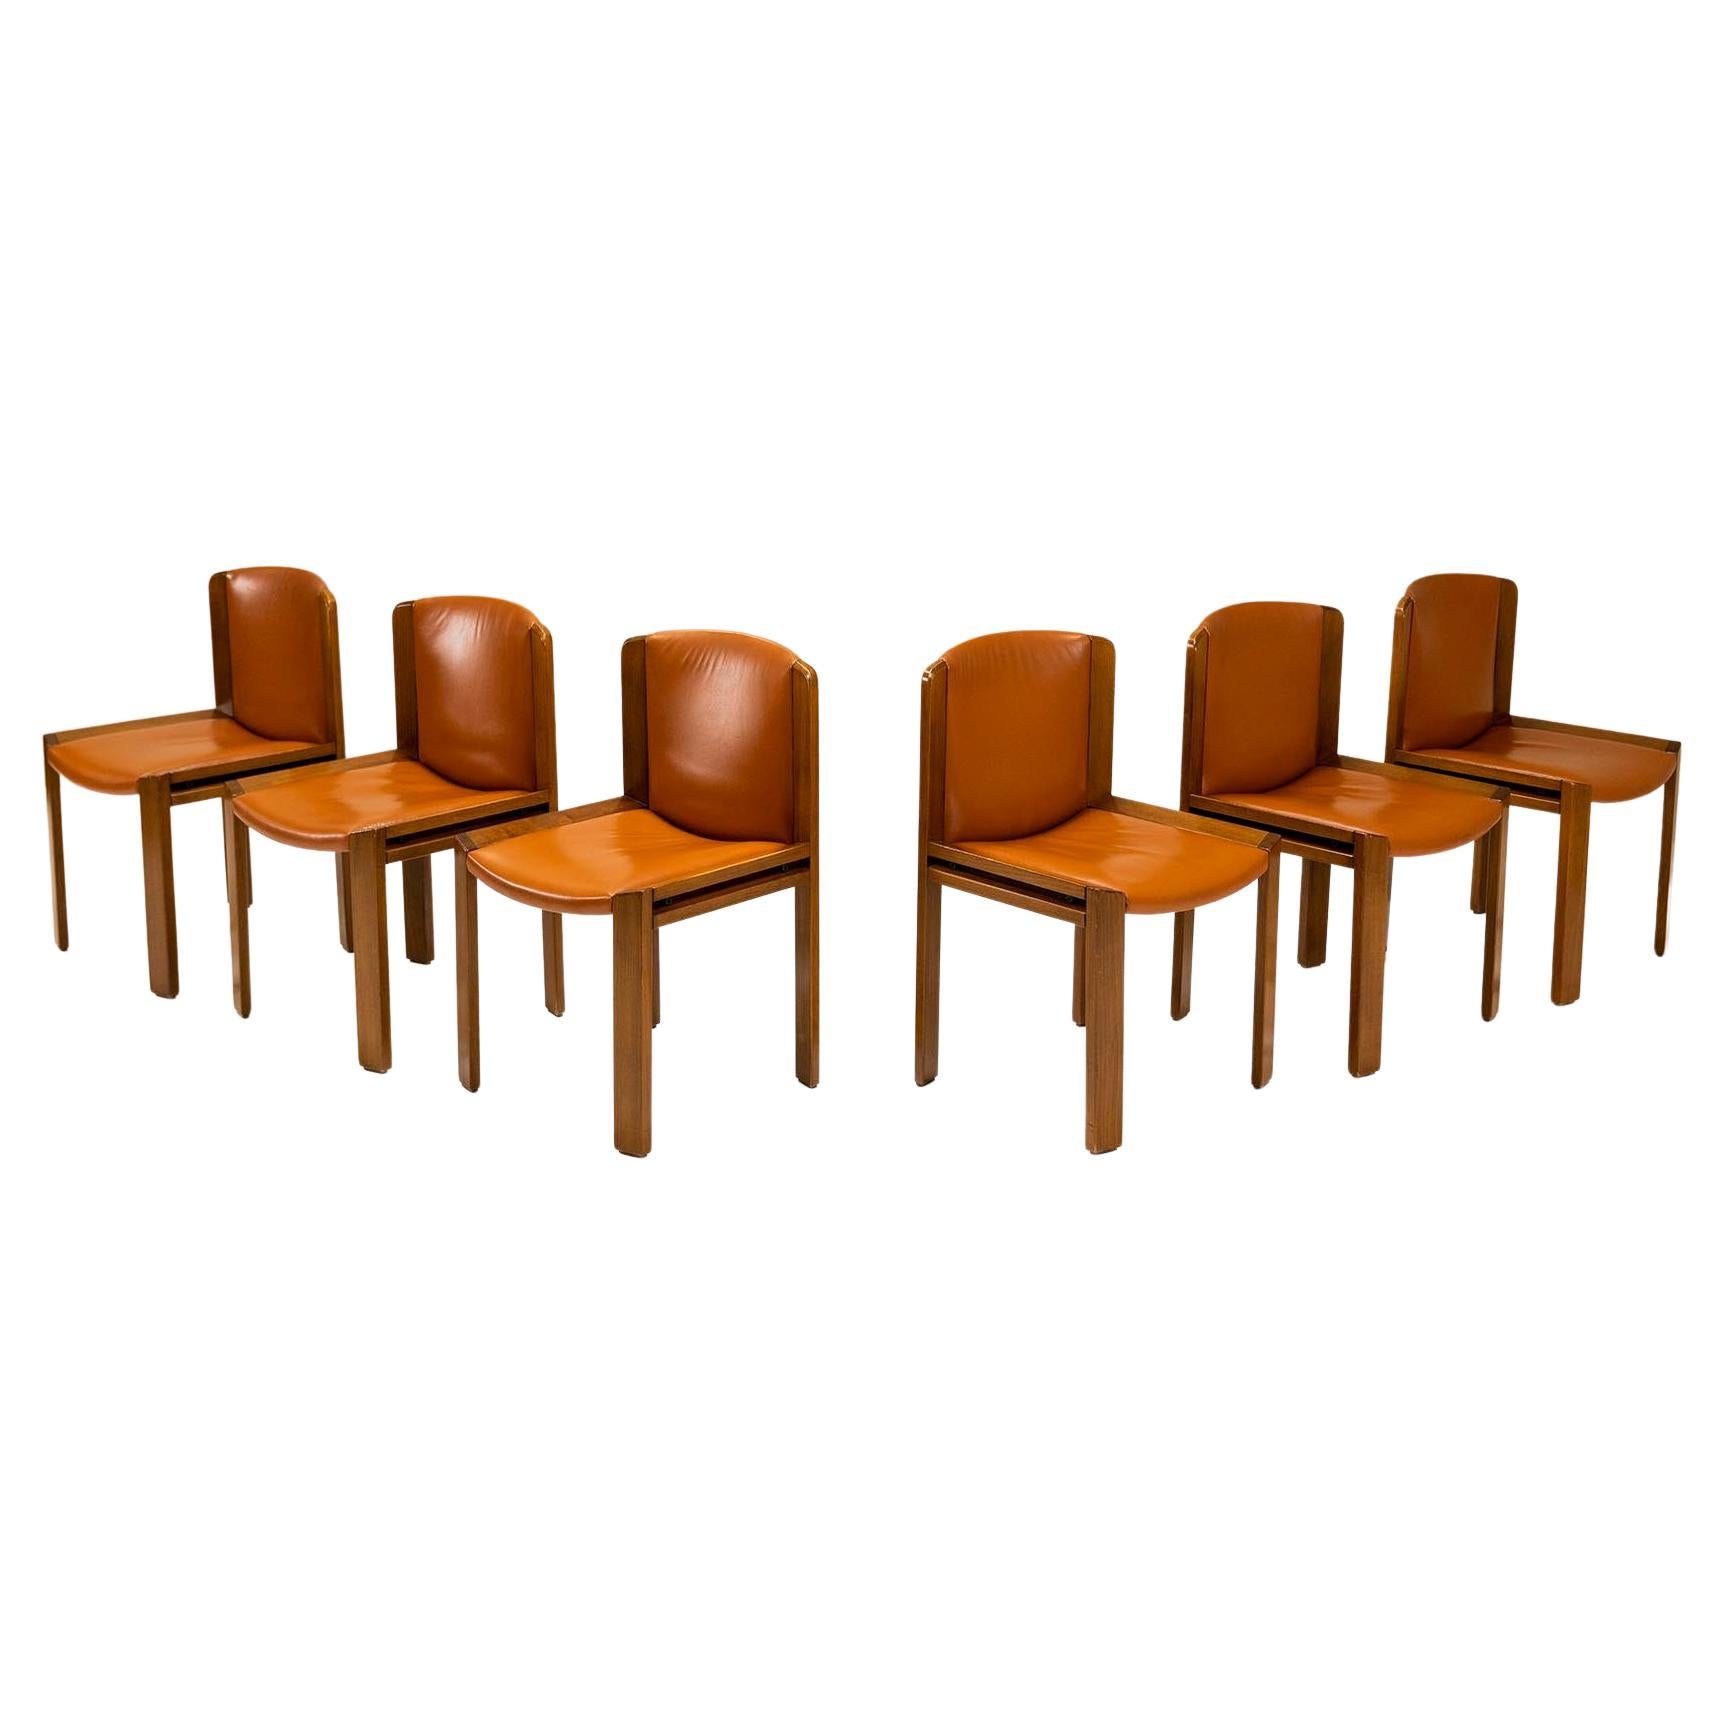 Joe Colombo 'Model 300' Dining Chairs in Oak and Leather for Pozzi, Italy 1965 For Sale